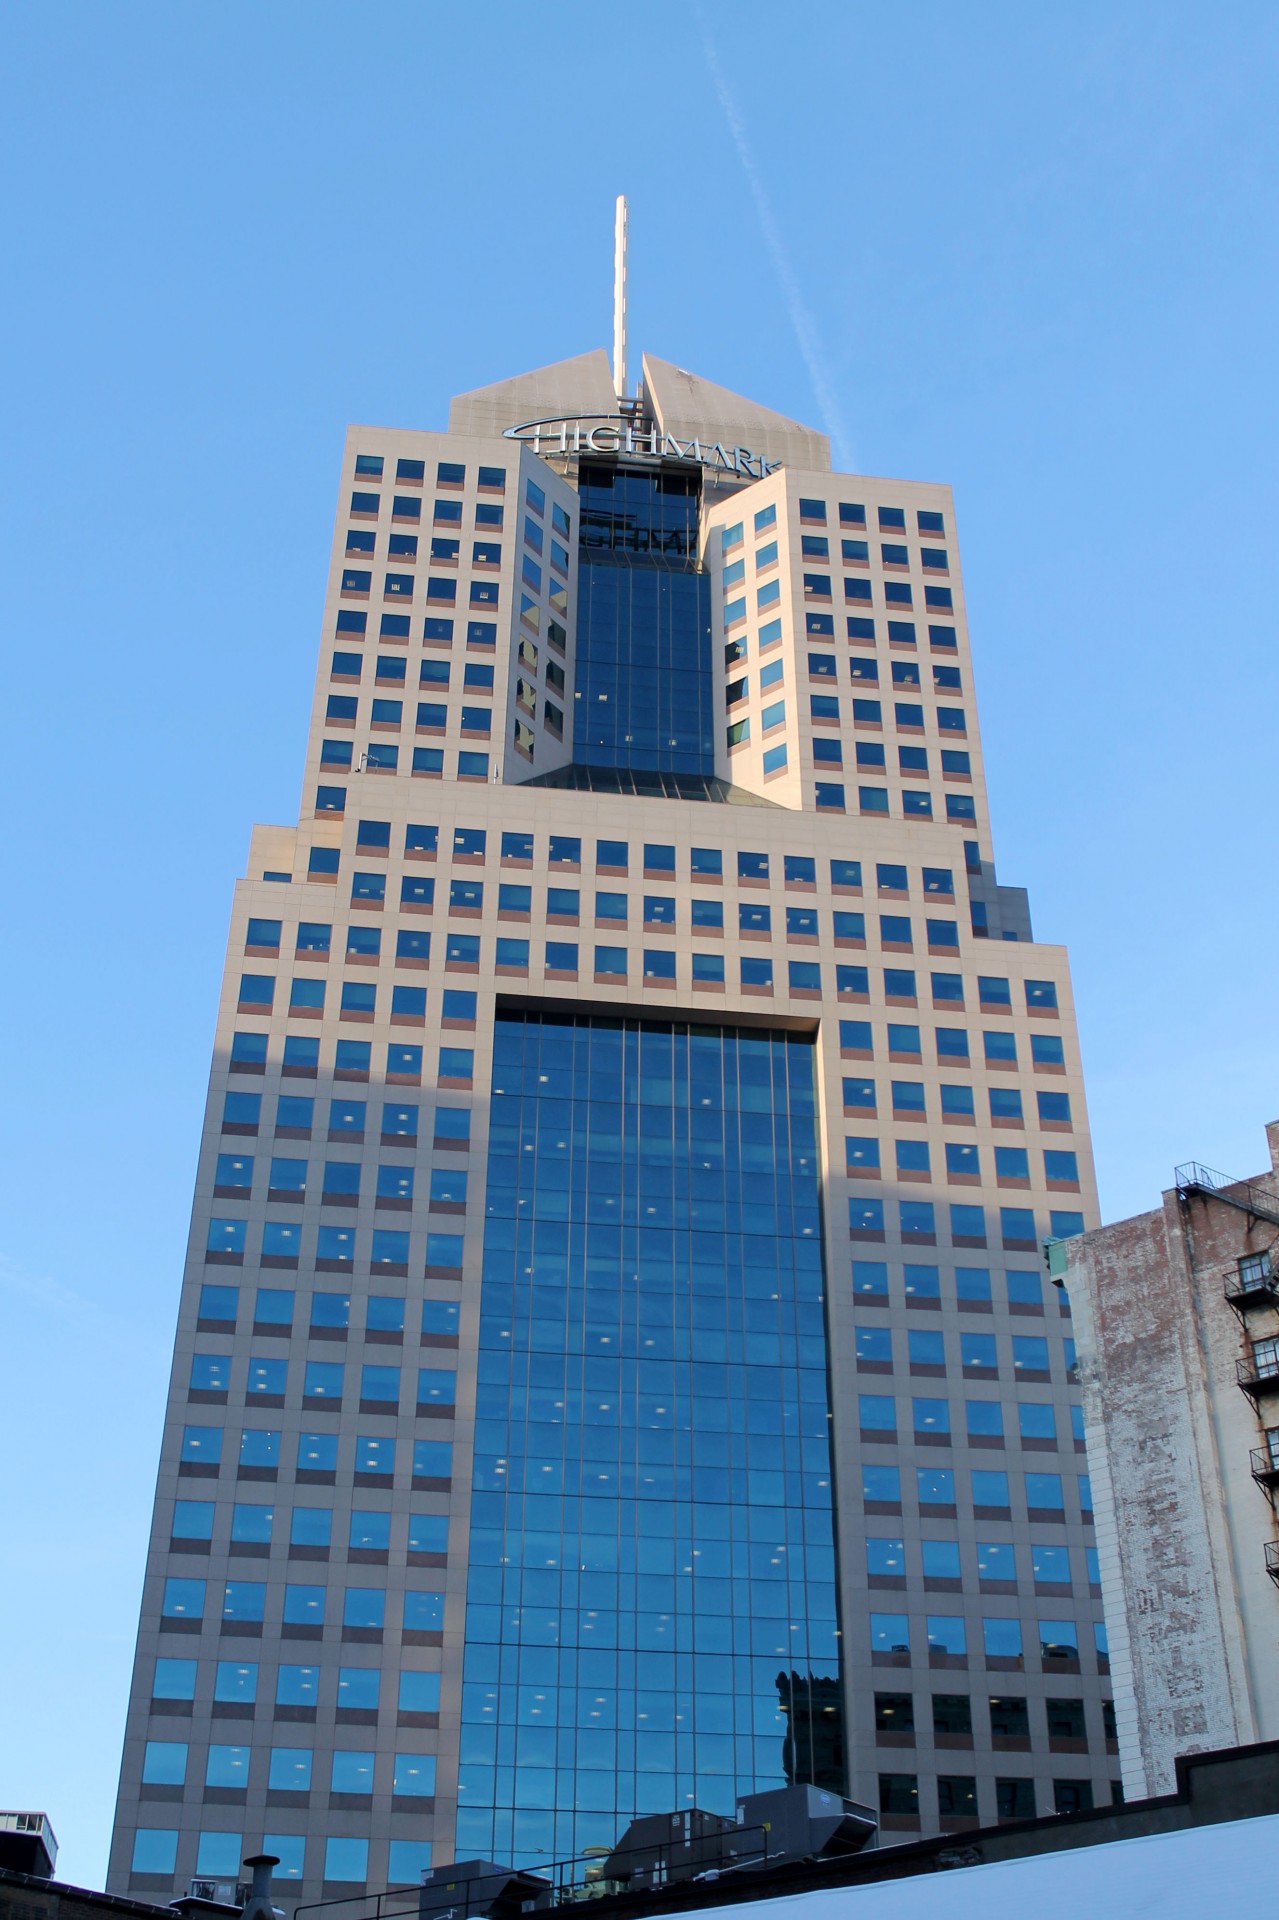 5th Avenue Place Pittsburgh - I really appreciate your premium download!